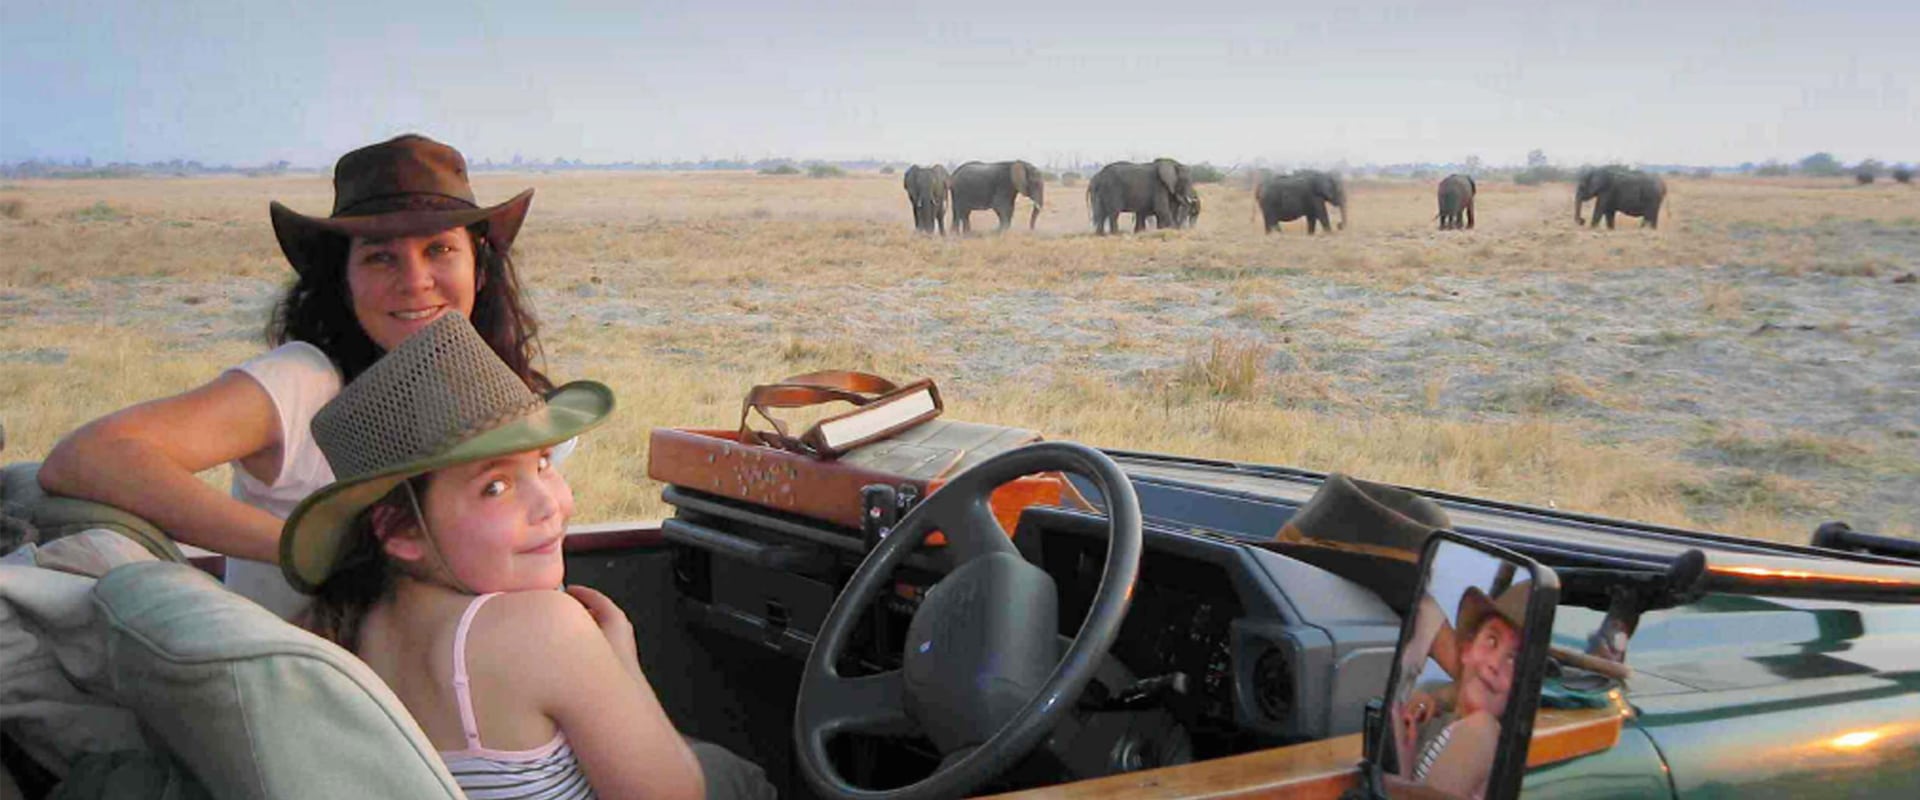 Watch the awesome spectacle of wildlife in their habitat on a game drive